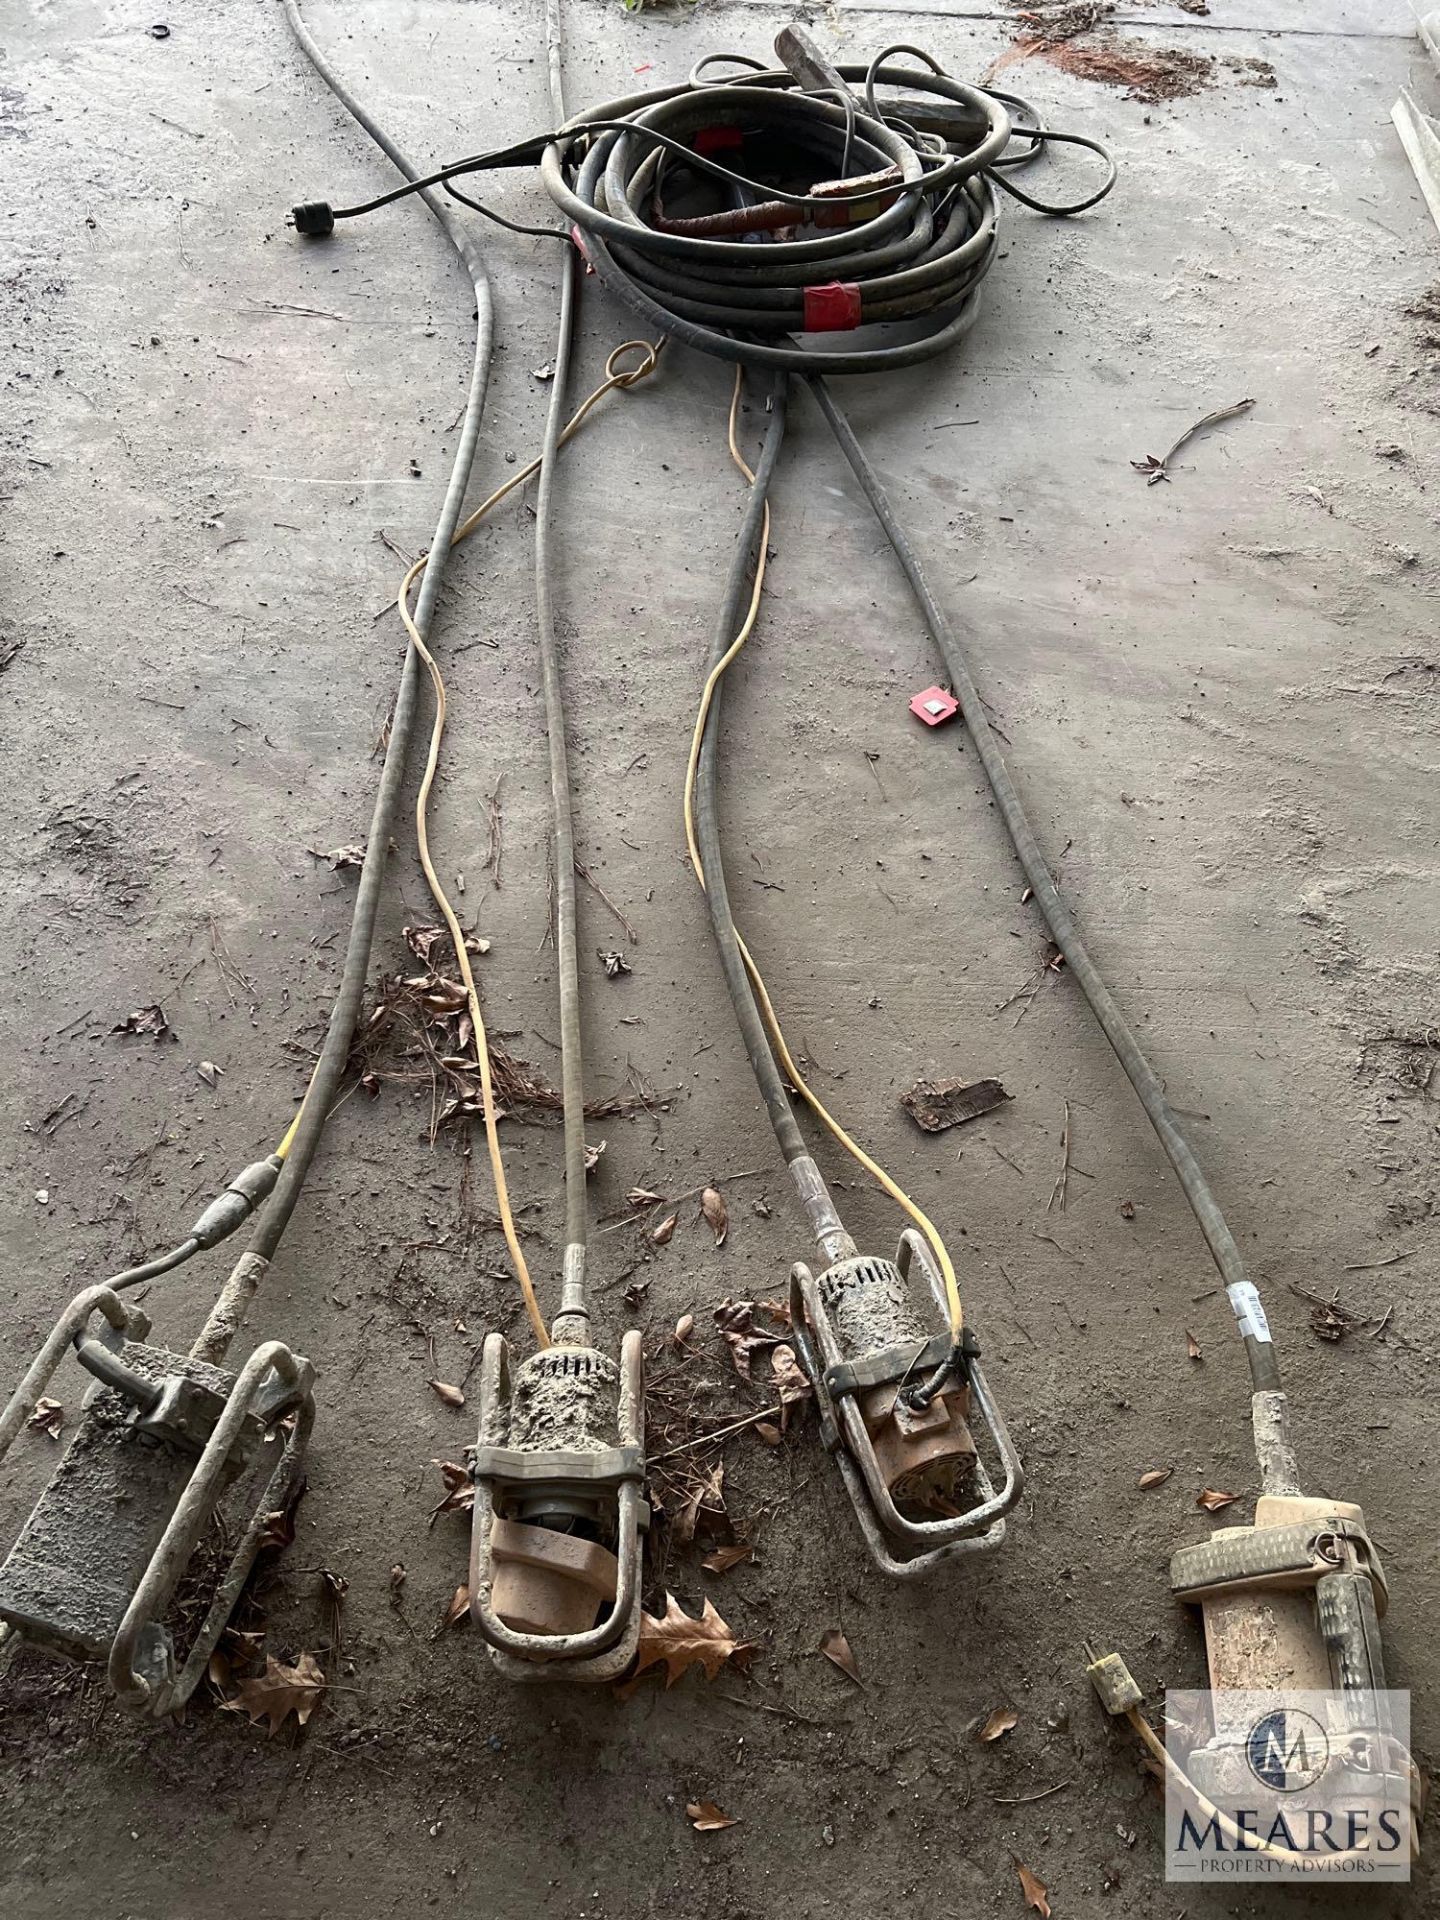 Group of Four Concrete Vibrators and Additional Cable